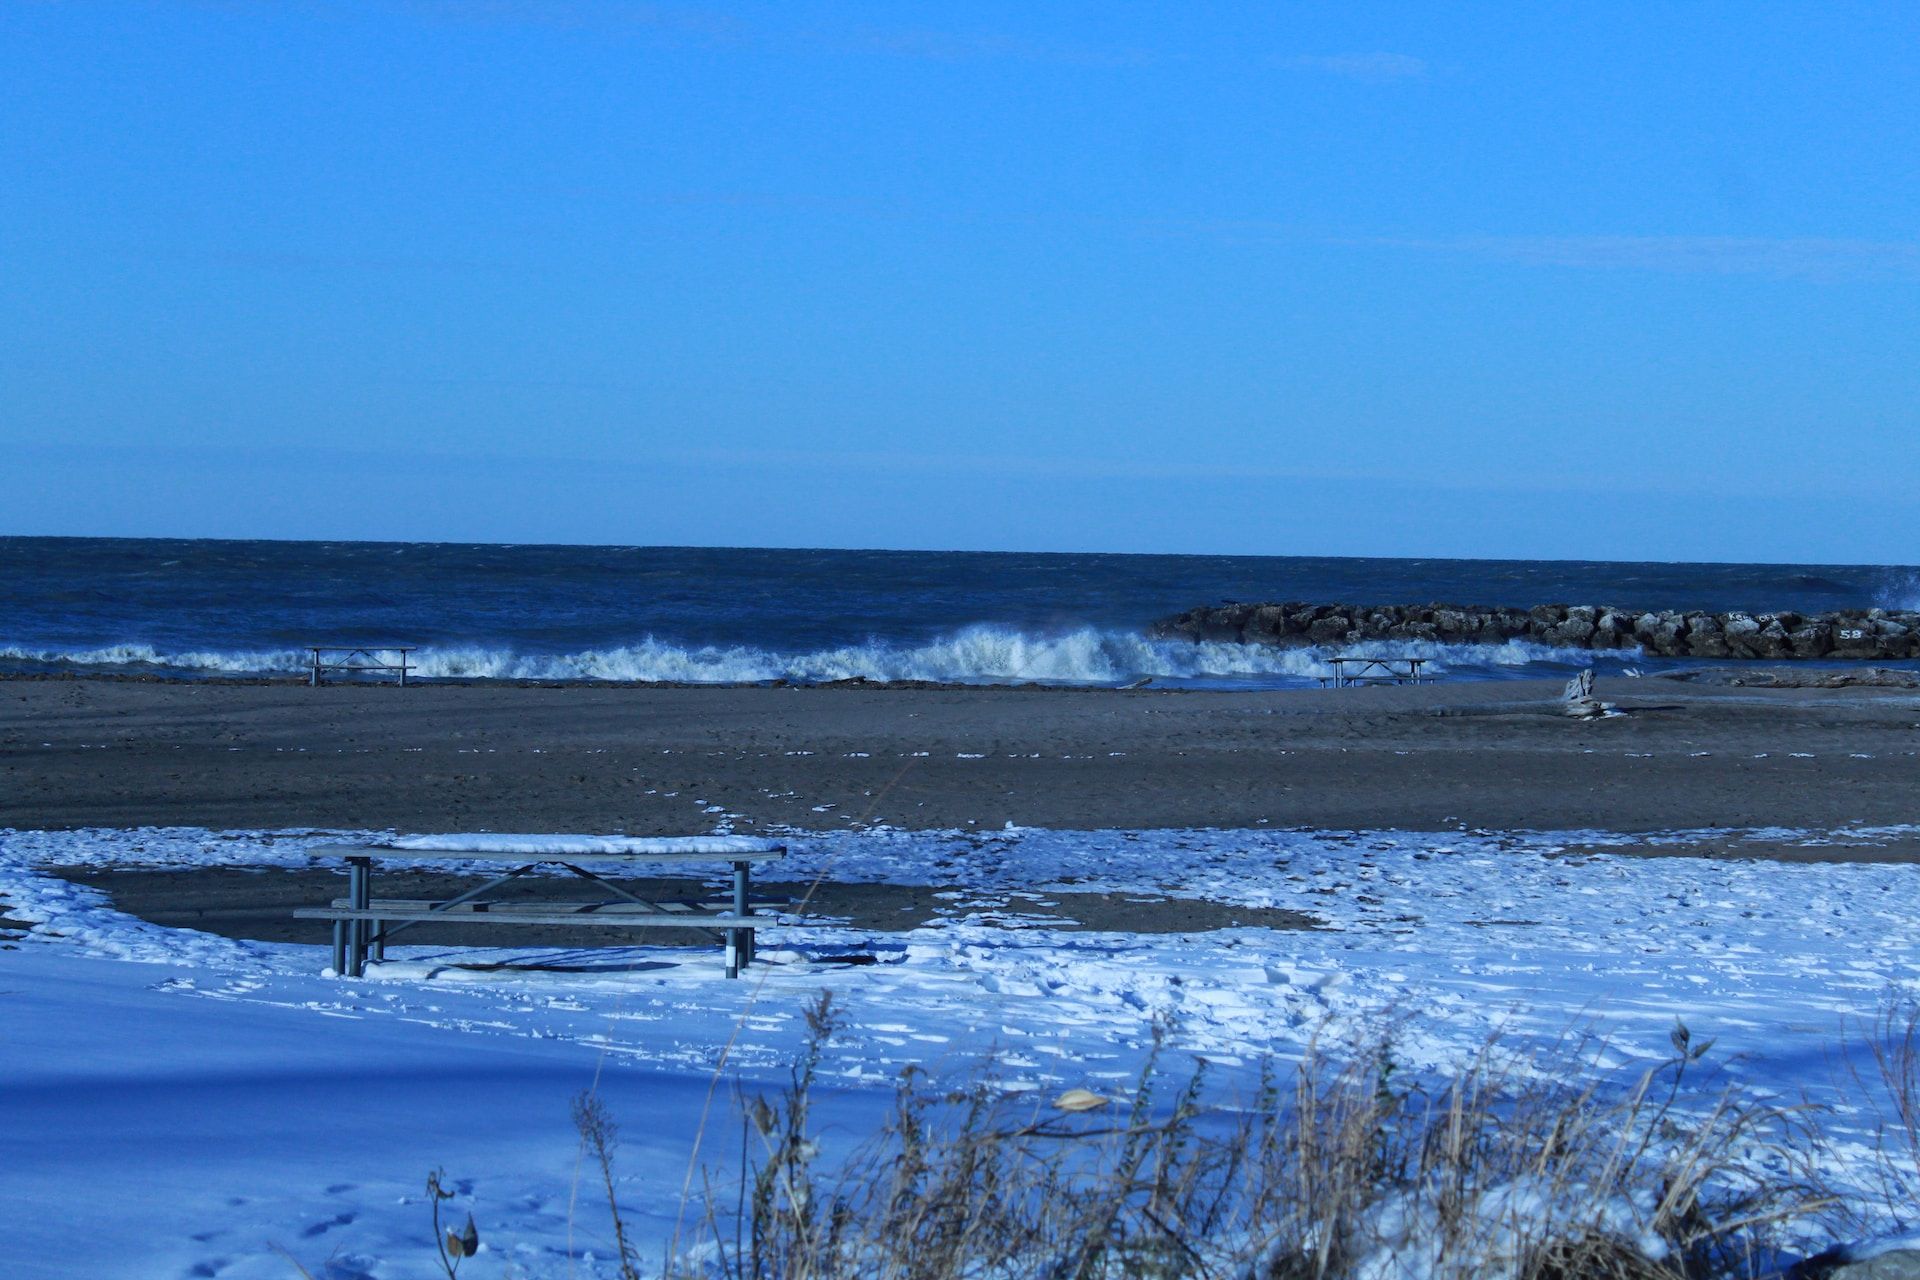 Leslie Beach in Presque Isle State Park, Erie County, Pennsylvania, during winter 